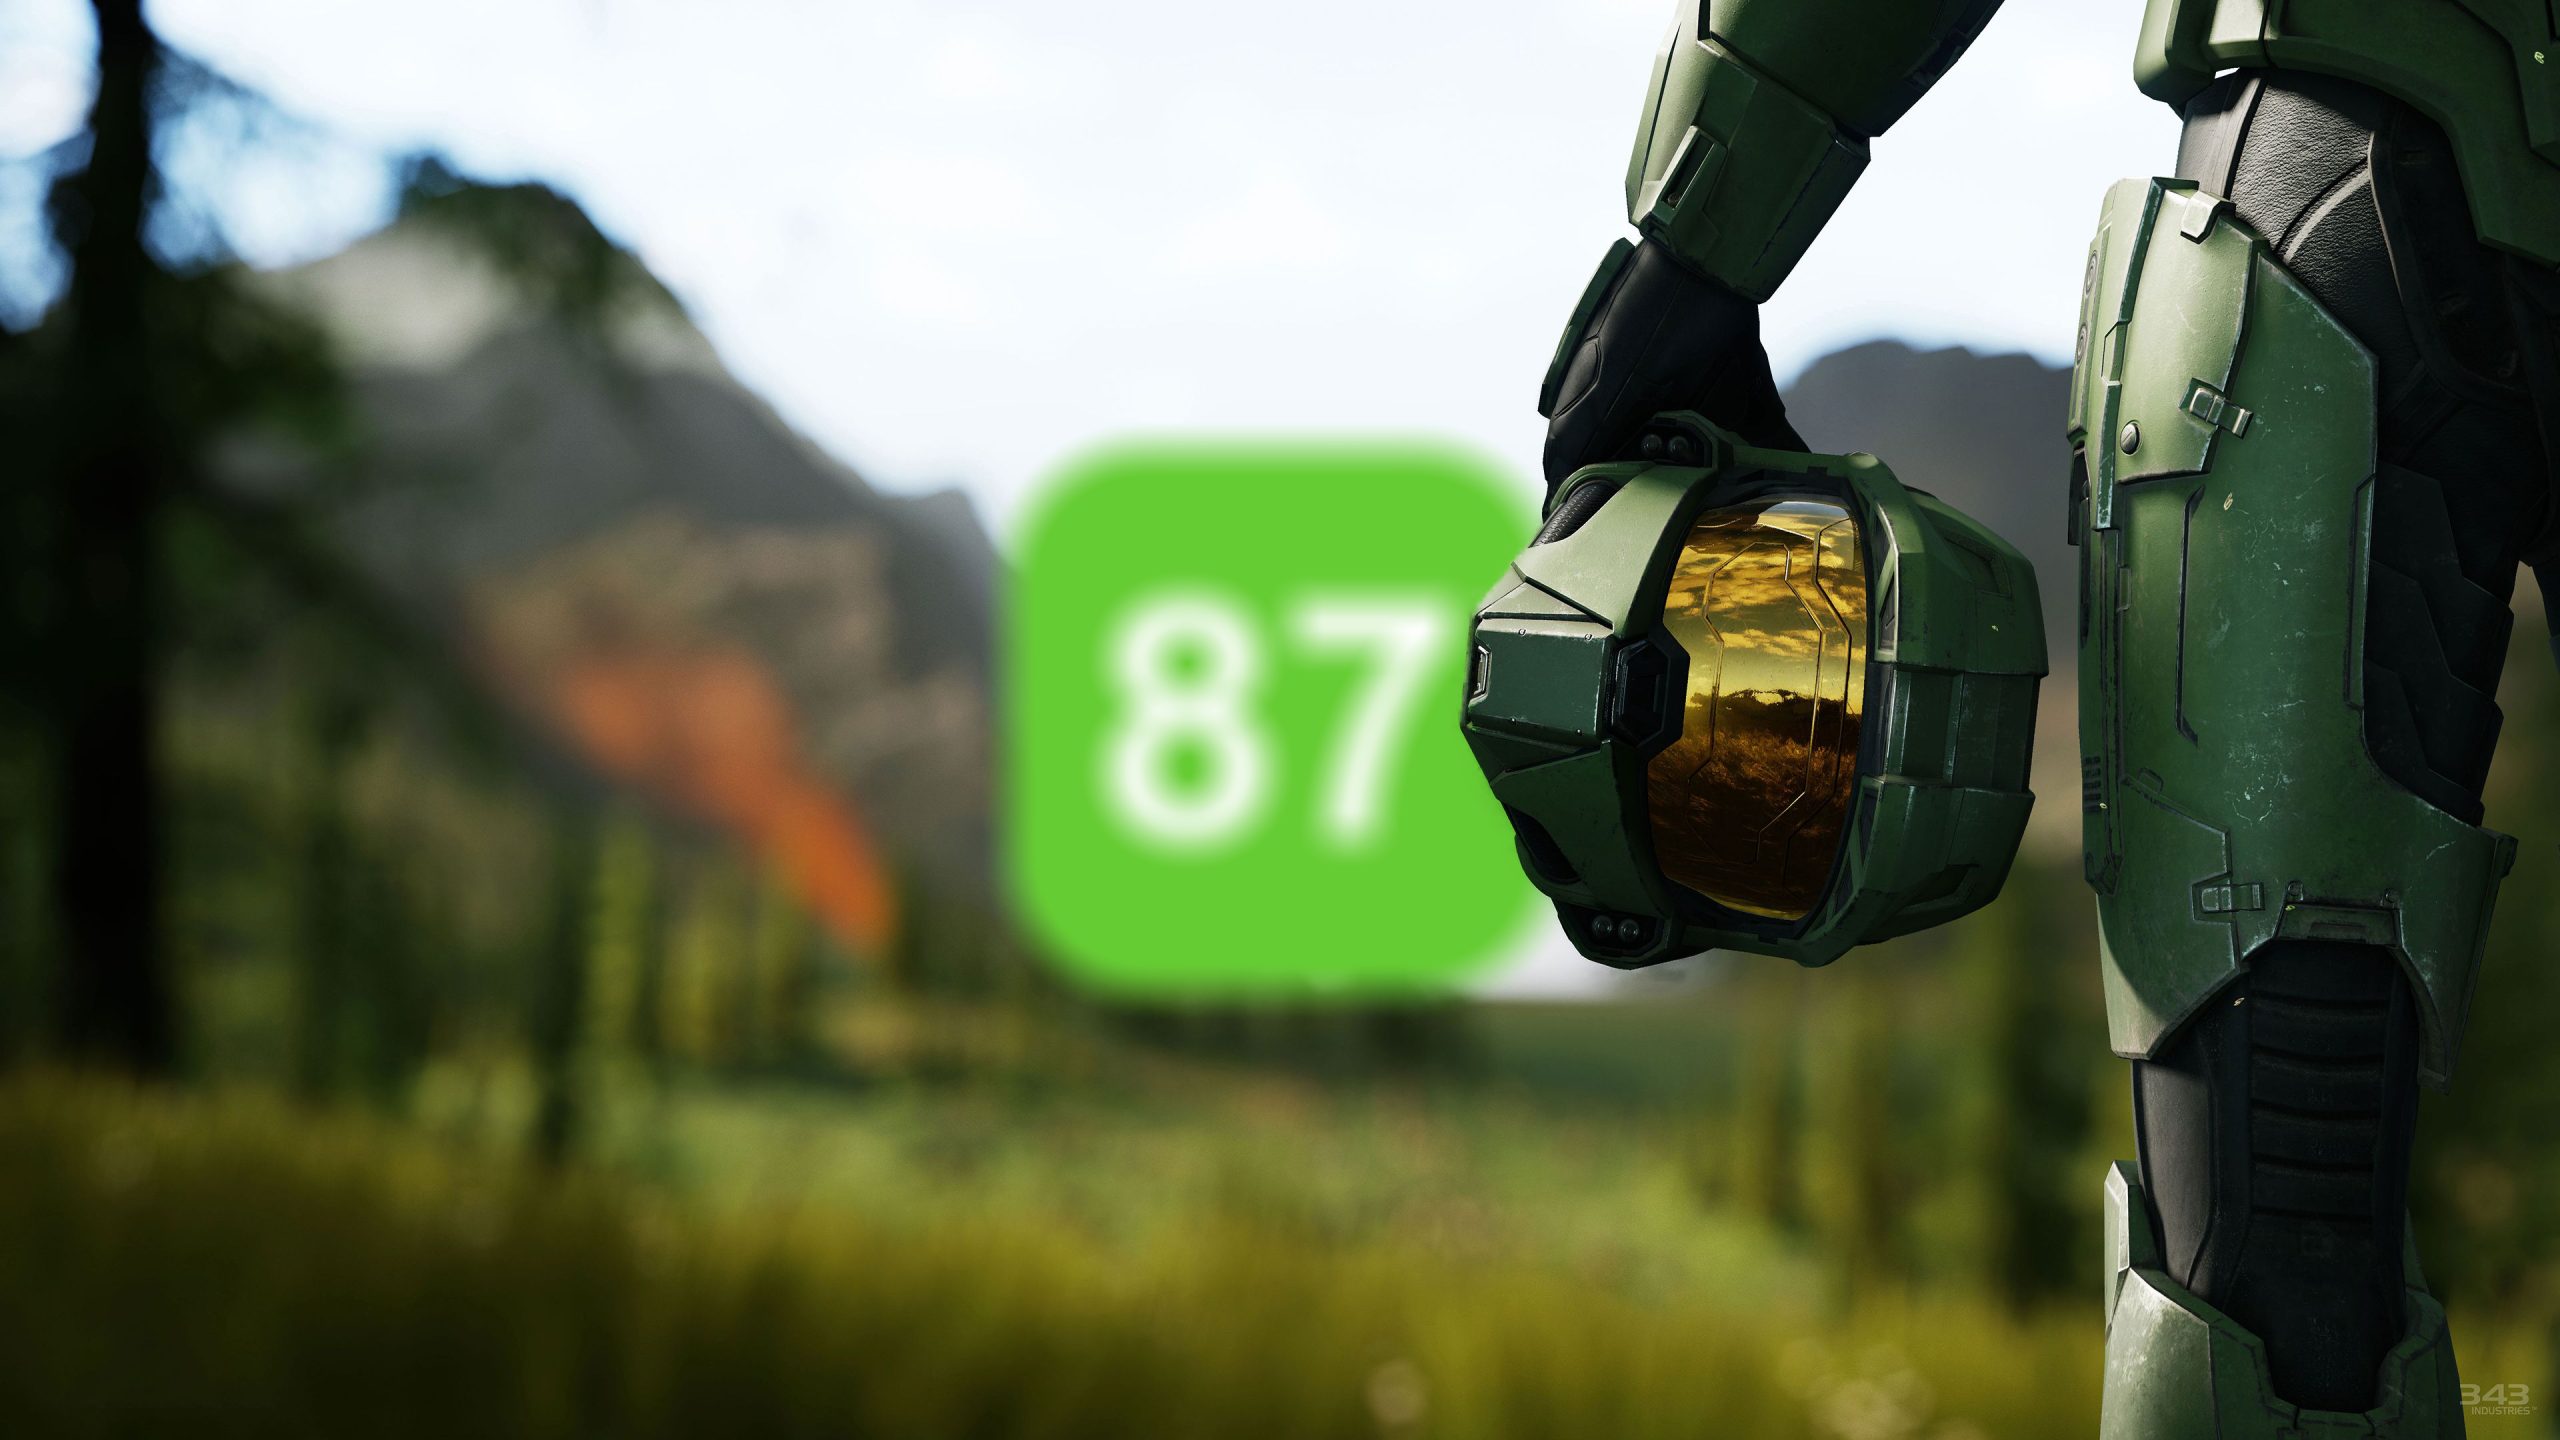 Poll: What Do You Think Halo Infinite's Metacritic Score Will Be?